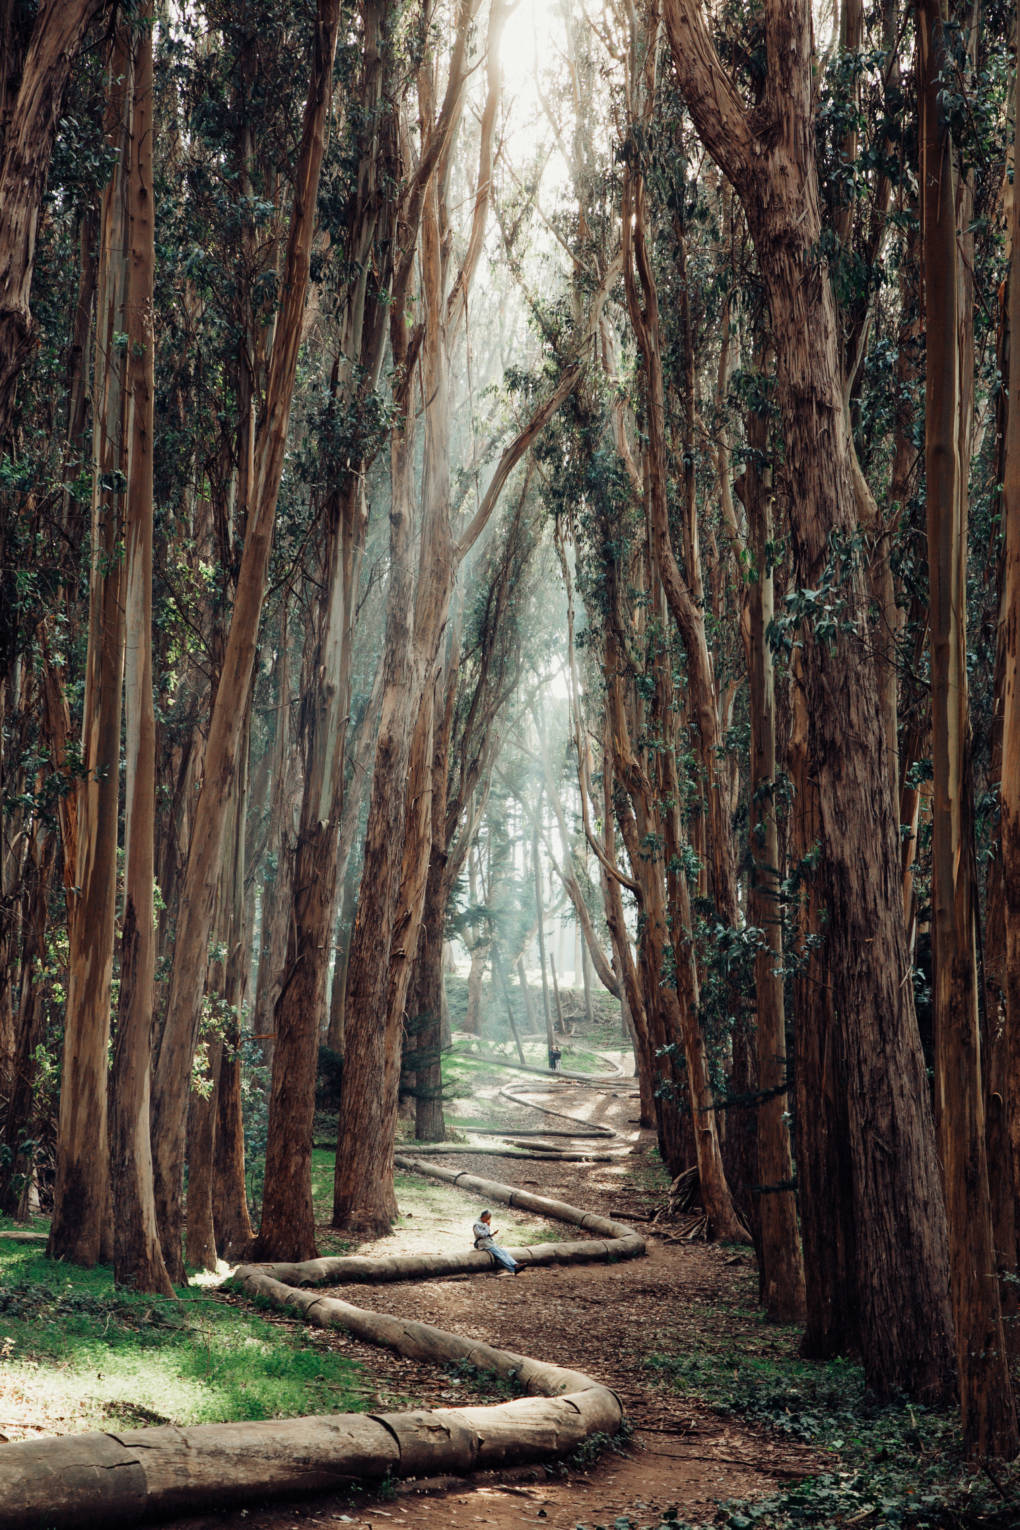 To some, the scent of eucalyptus trees is simply the scent of California.